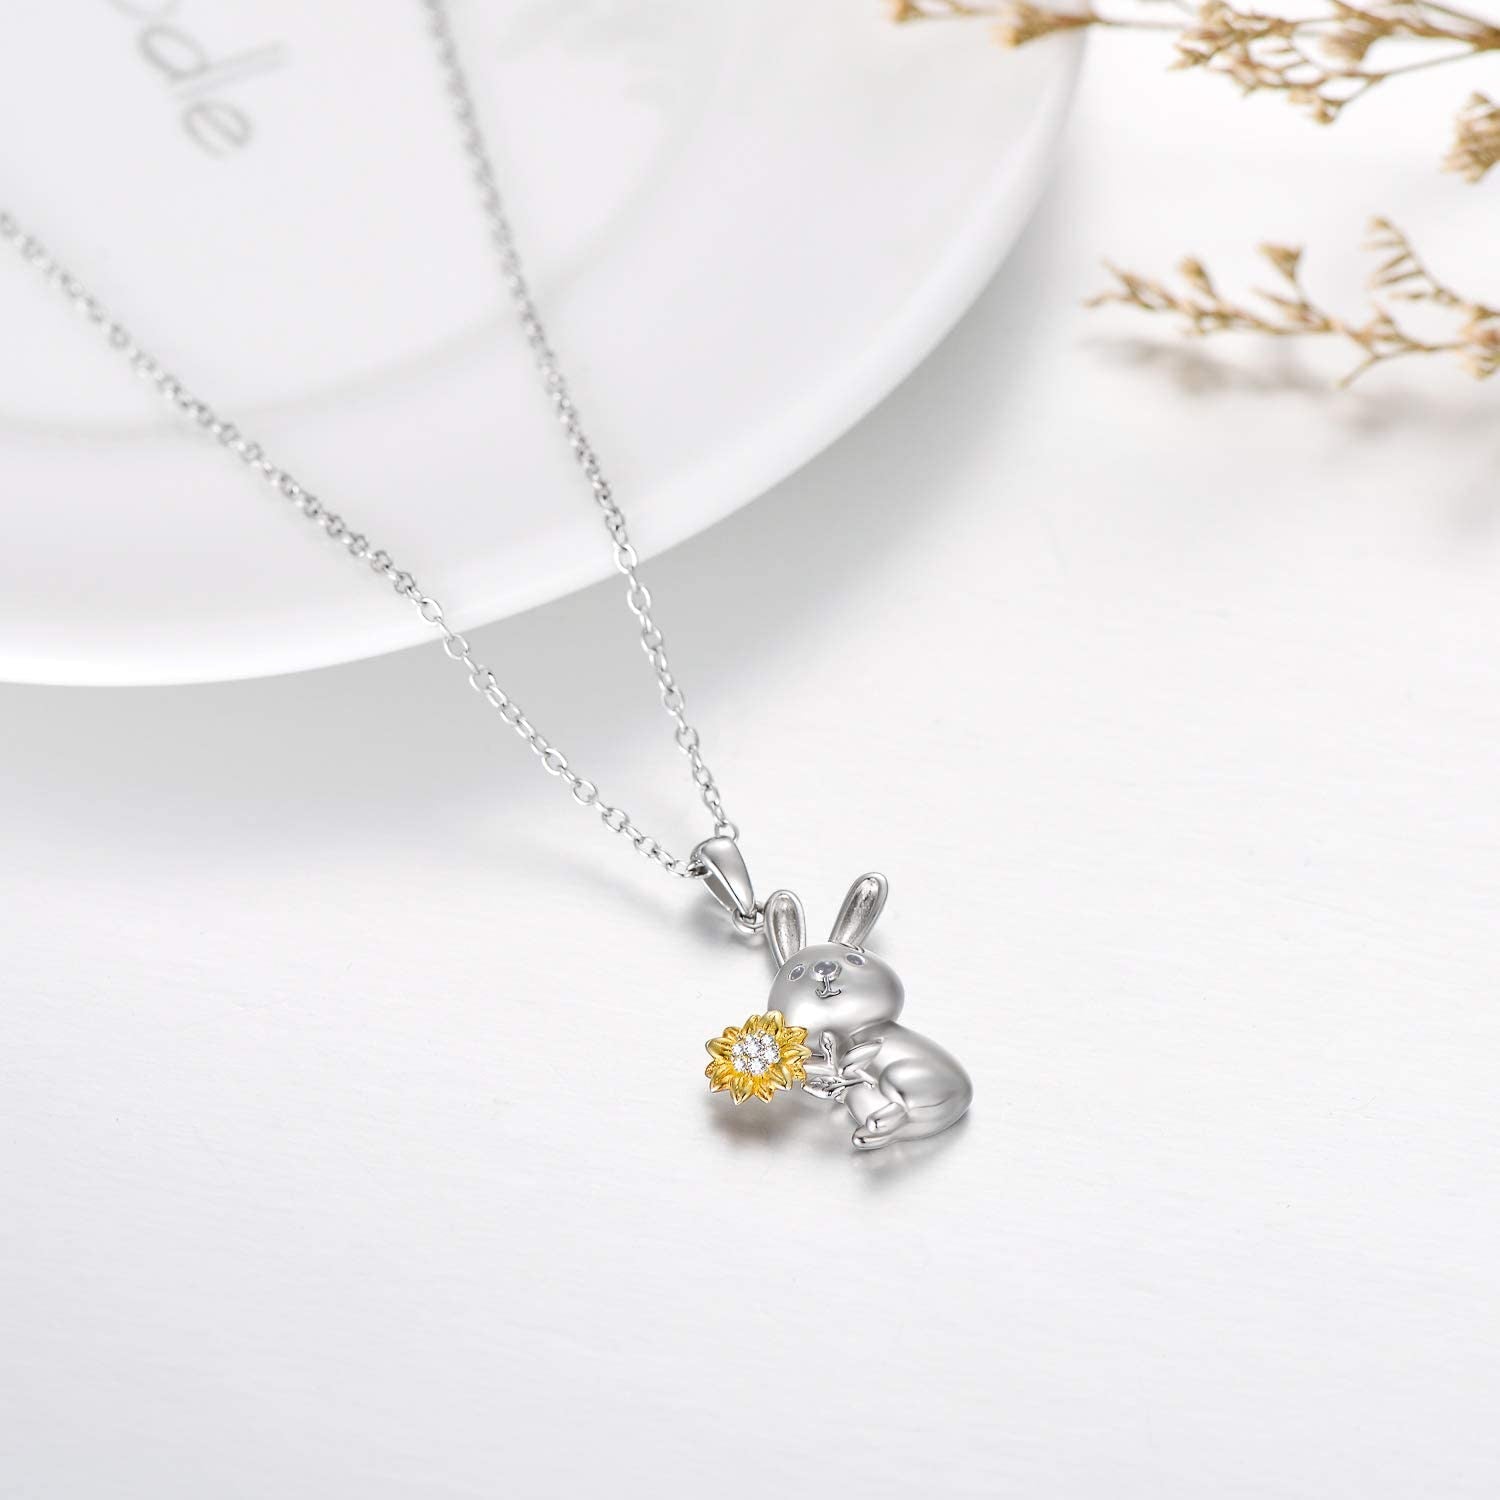 Rose Valley Sunflower Pendant Necklace for Women Rabbit Pendants Fashion Jewelry Girls Gifts YN029 - Charlie Dolly